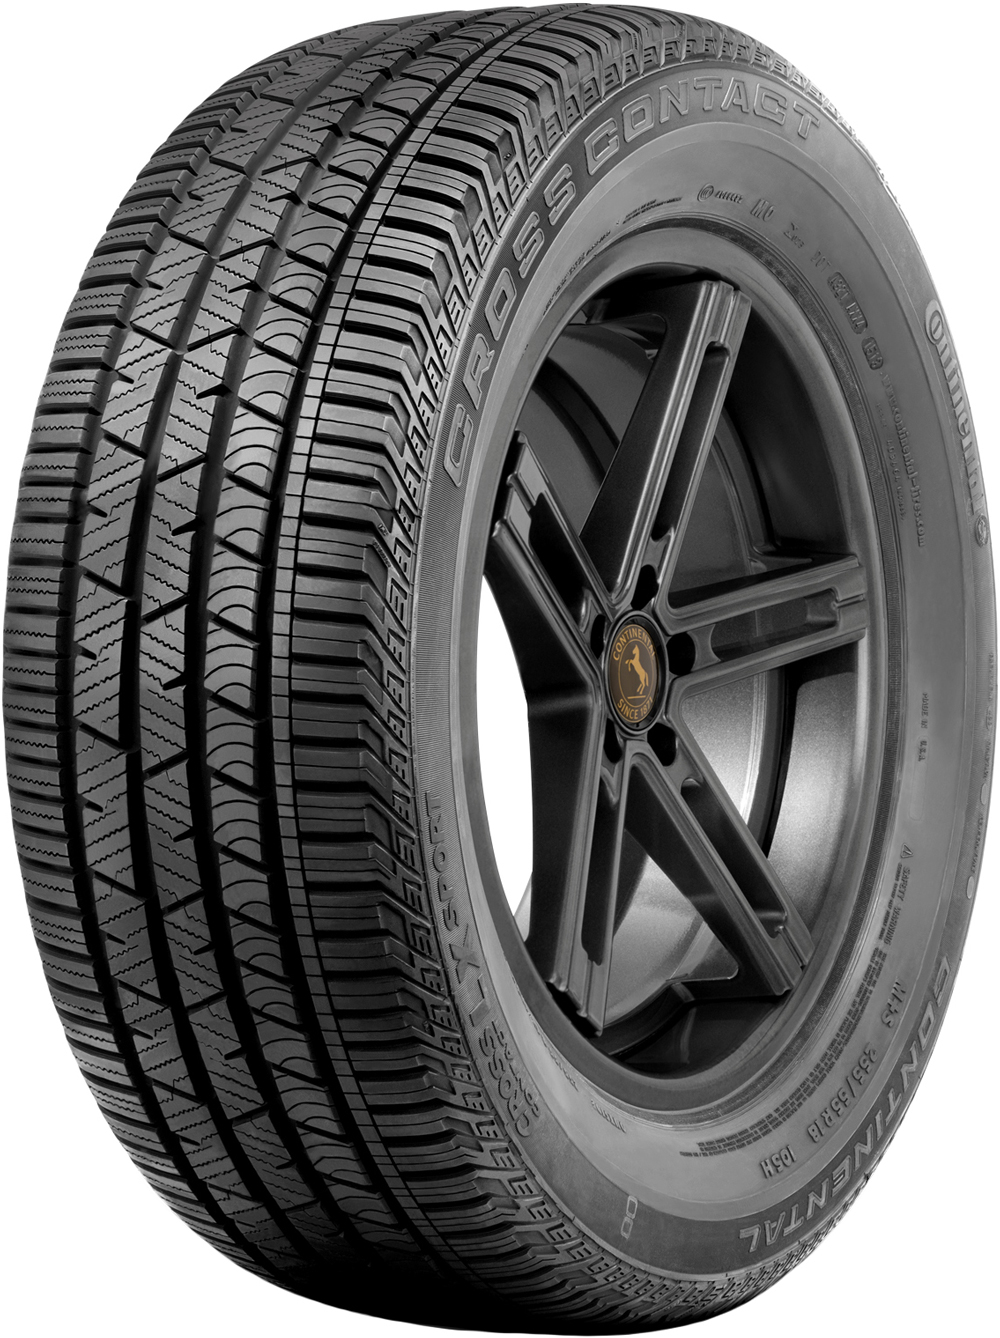 Anvelope auto CONTINENTAL Conti Cross Contact LX Sport XL 275/40 R22 108